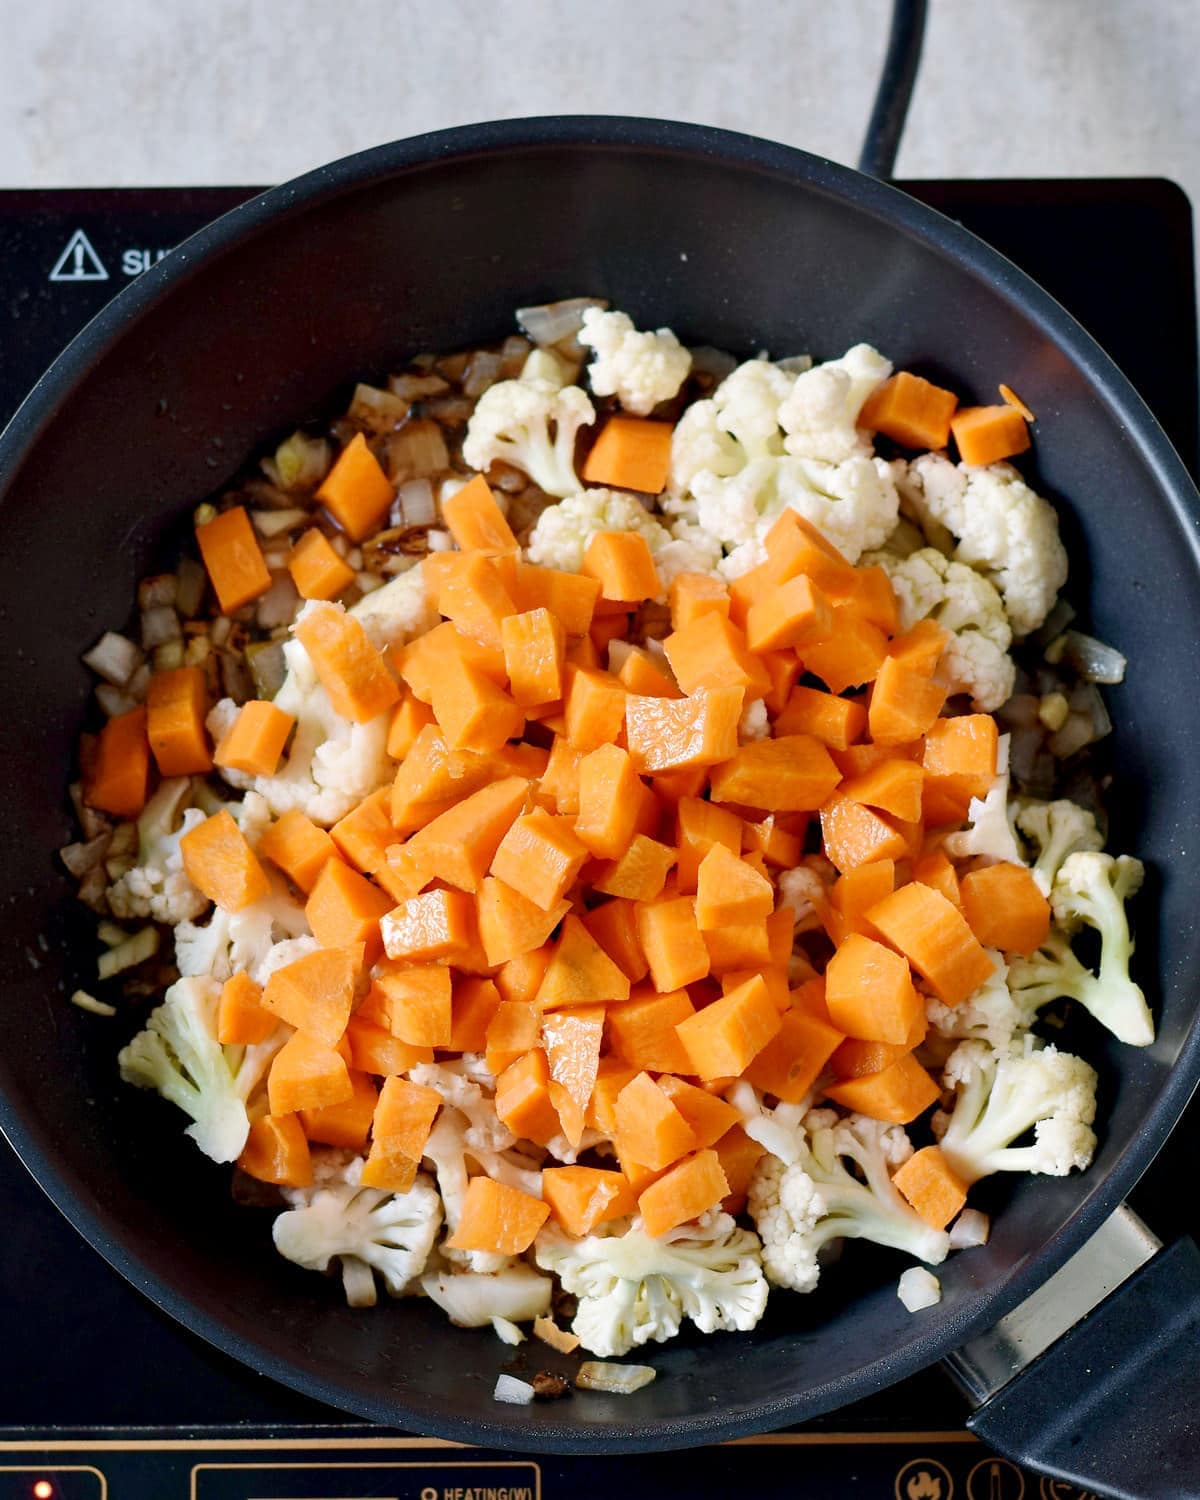 Carrot and cauliflower in a pan